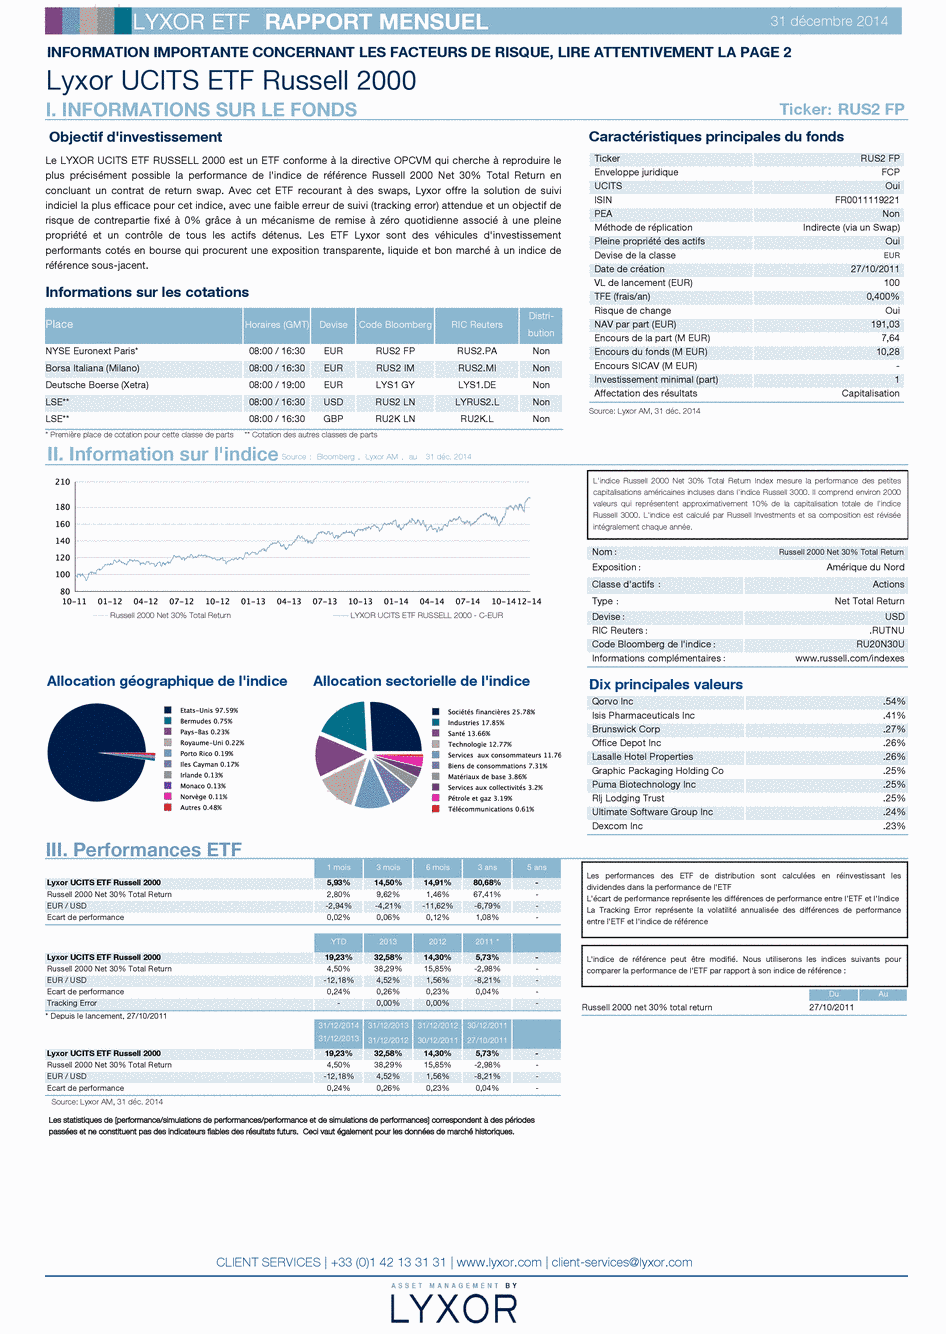 Reporting LYXOR UCITS ETF RUSSELL 2000 PART C-EUR - 31/12/2014 - Français